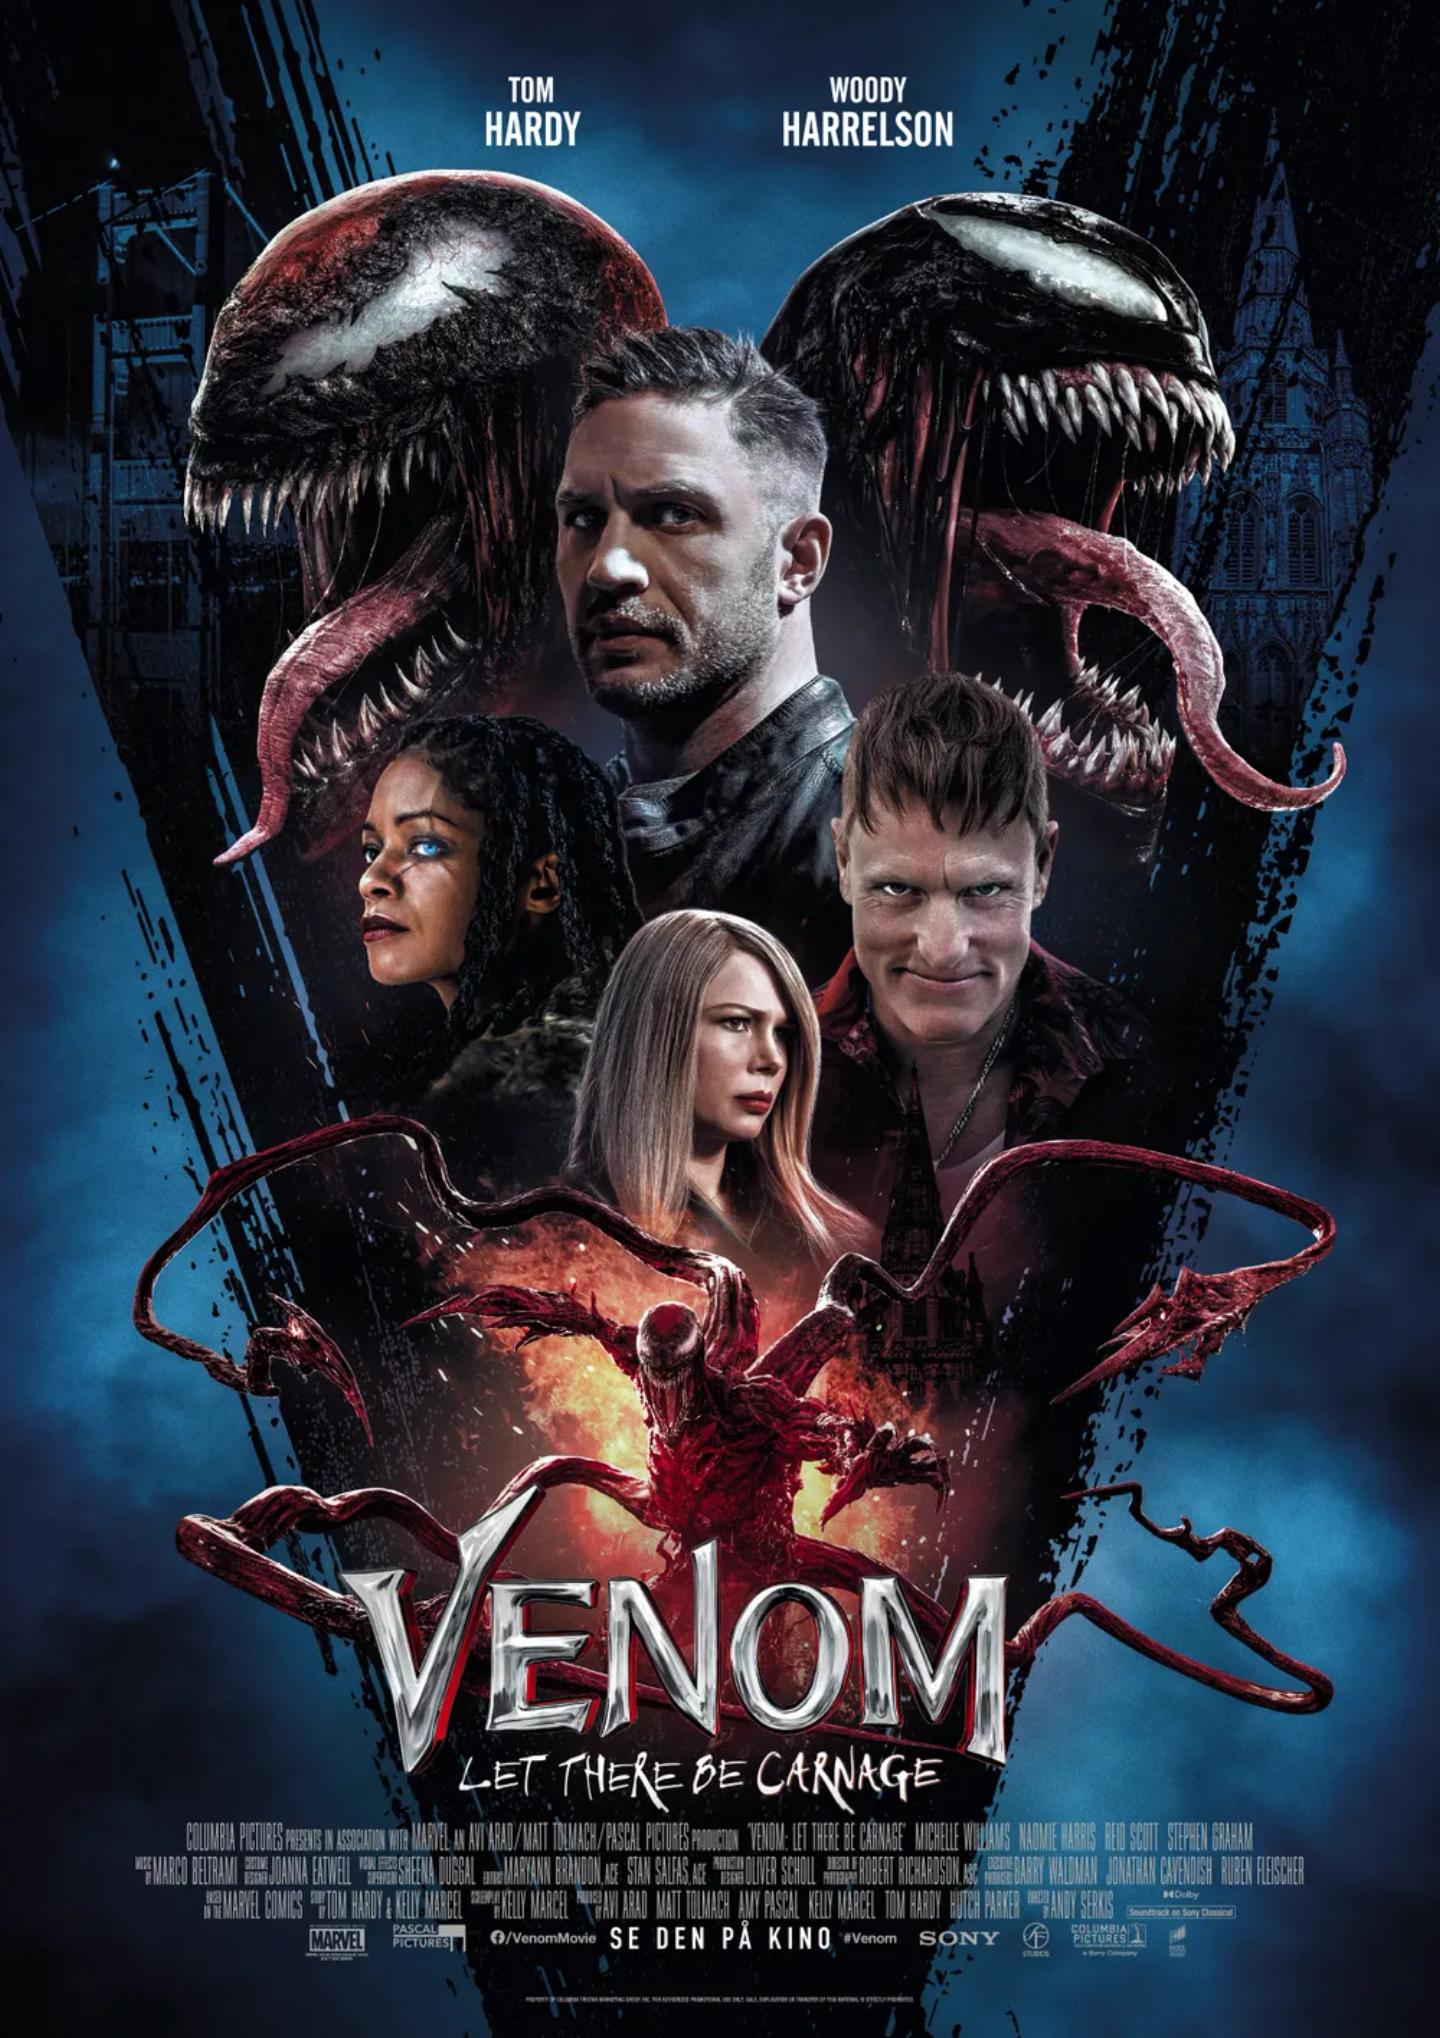 Plakat for 'Venom: Let There Be Carnage'